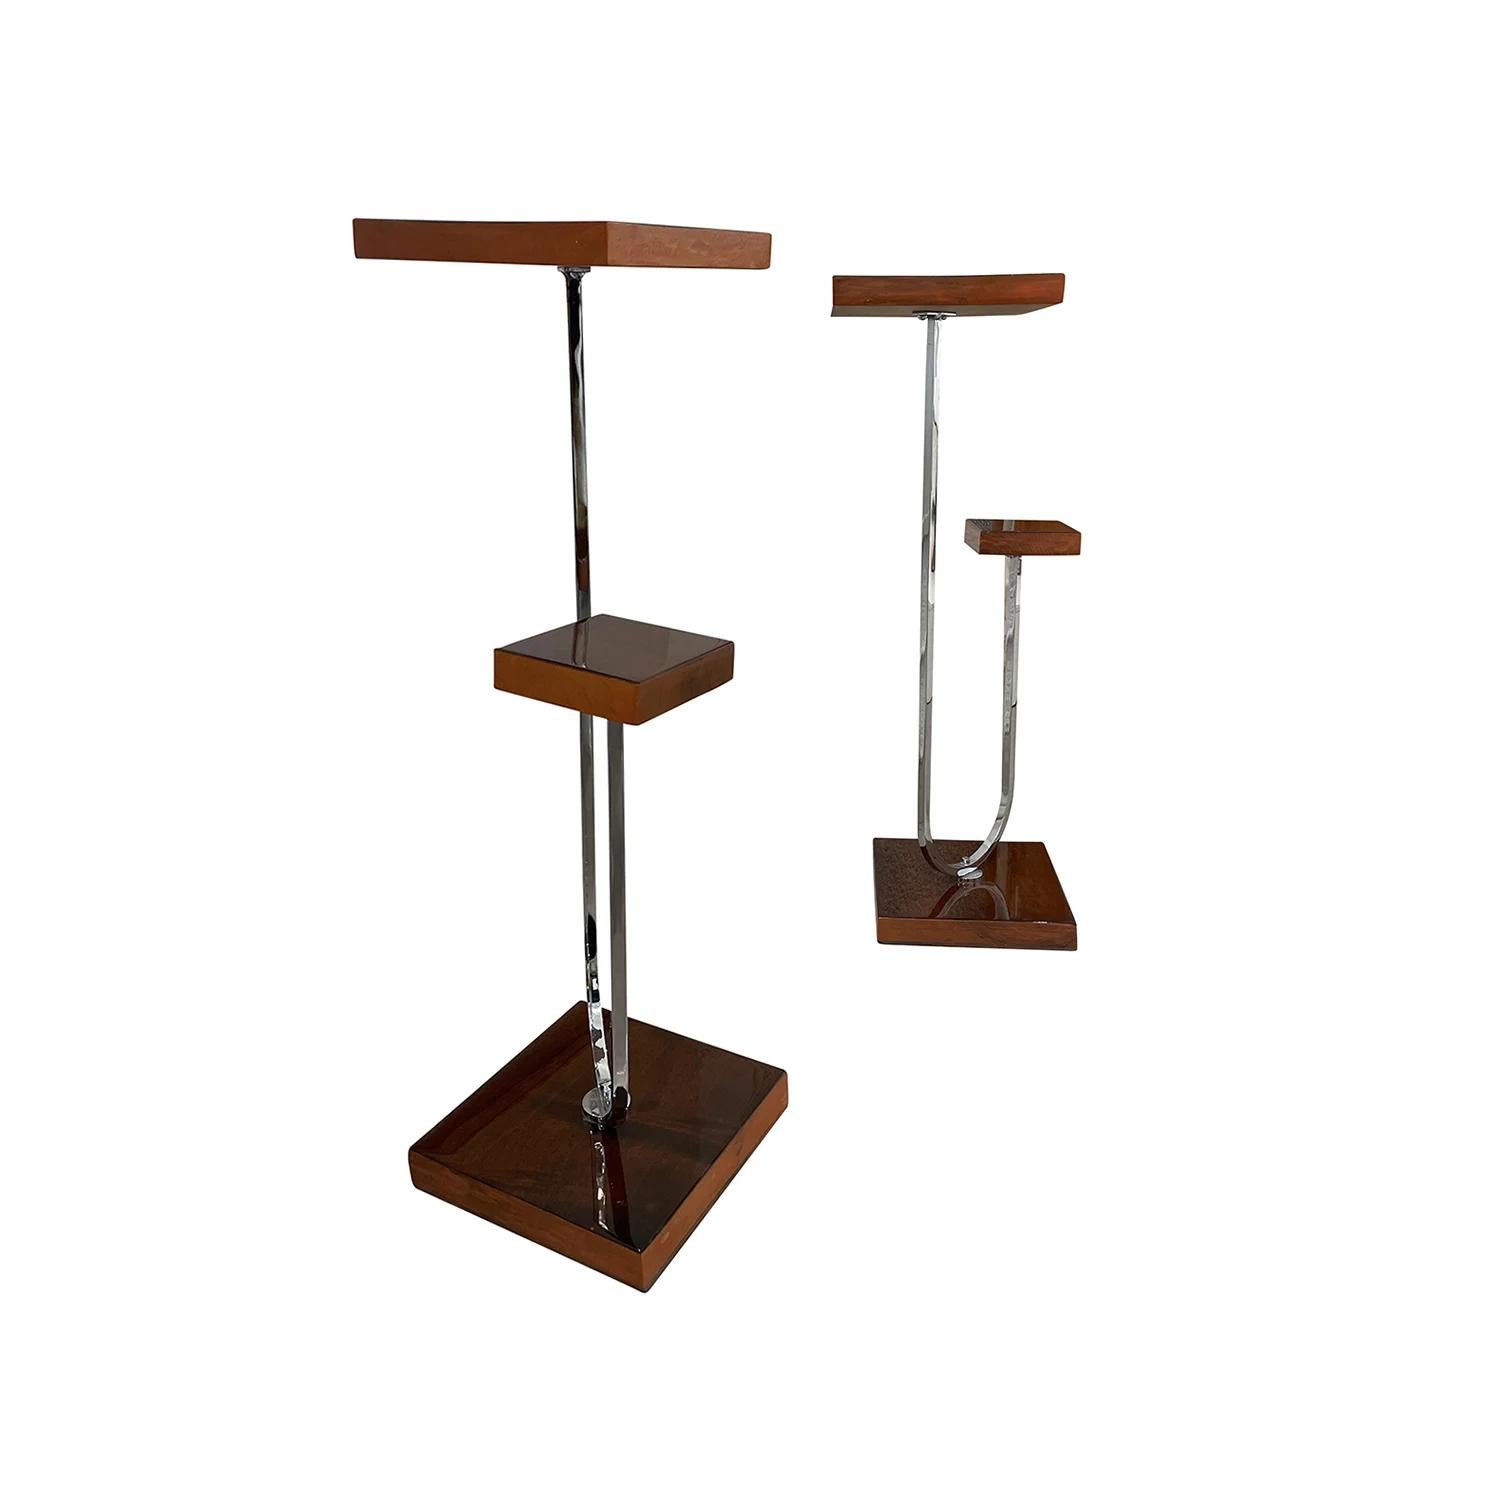 Hand-Carved 20th Century Italian Art Deco Pair of Small Mahogany Pedestals, Side Tables For Sale